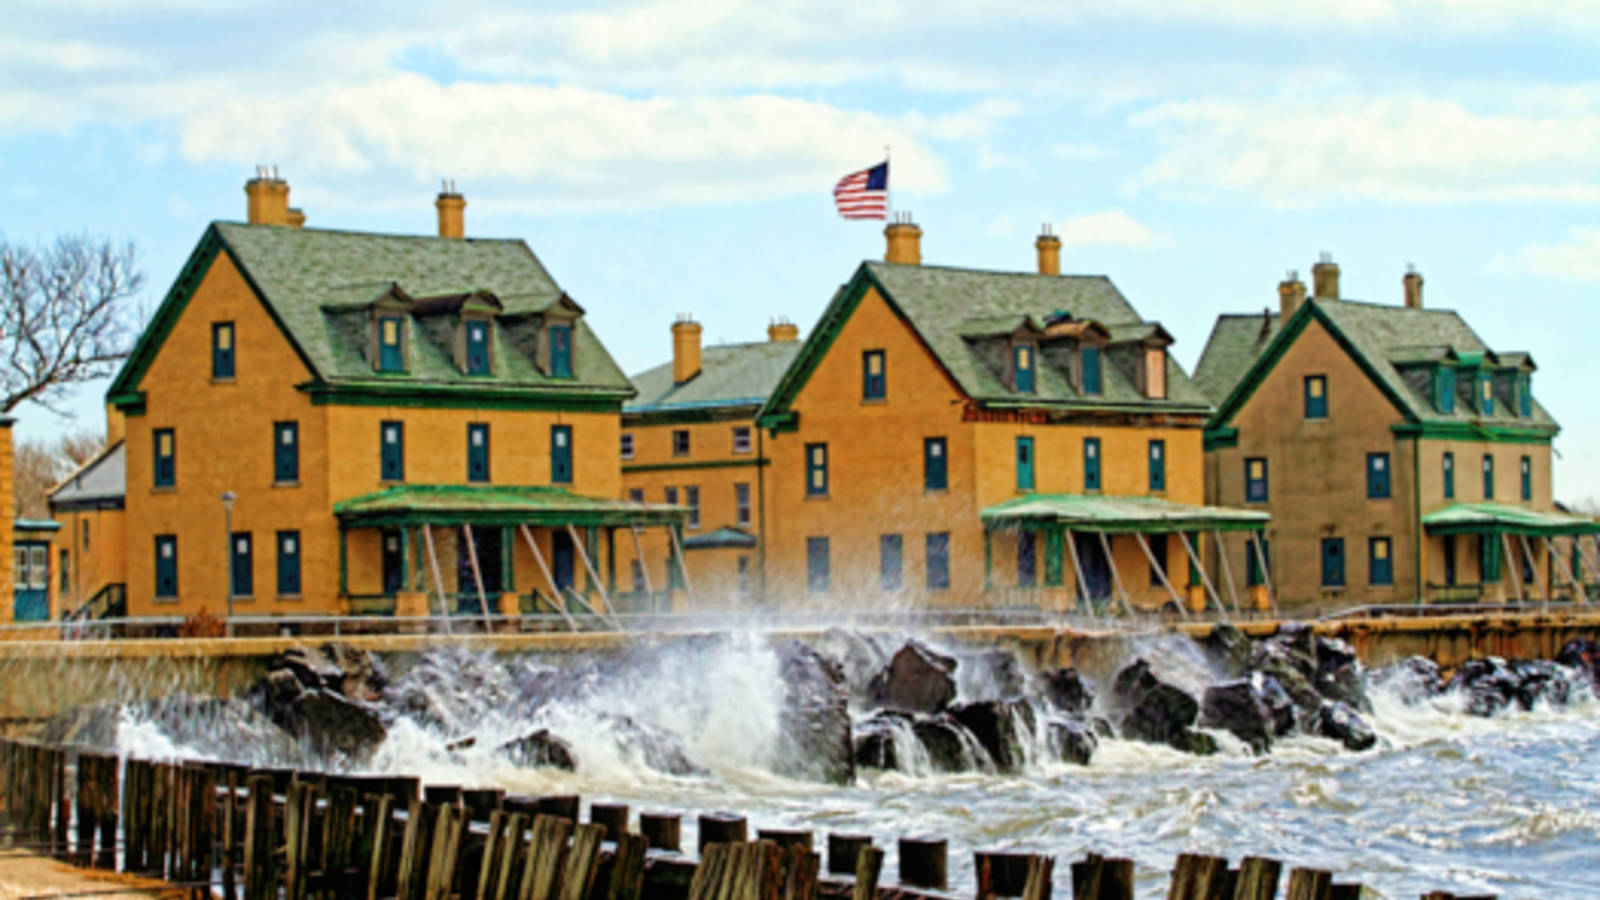 <p>Storm surge pounds the deteriorating seawall at Fort Hancock which serves as the only defense protecting historic buildings from high tides and coastal storms on Officers Row at Sandy Hook, Gateway National Recreation Area.</p>